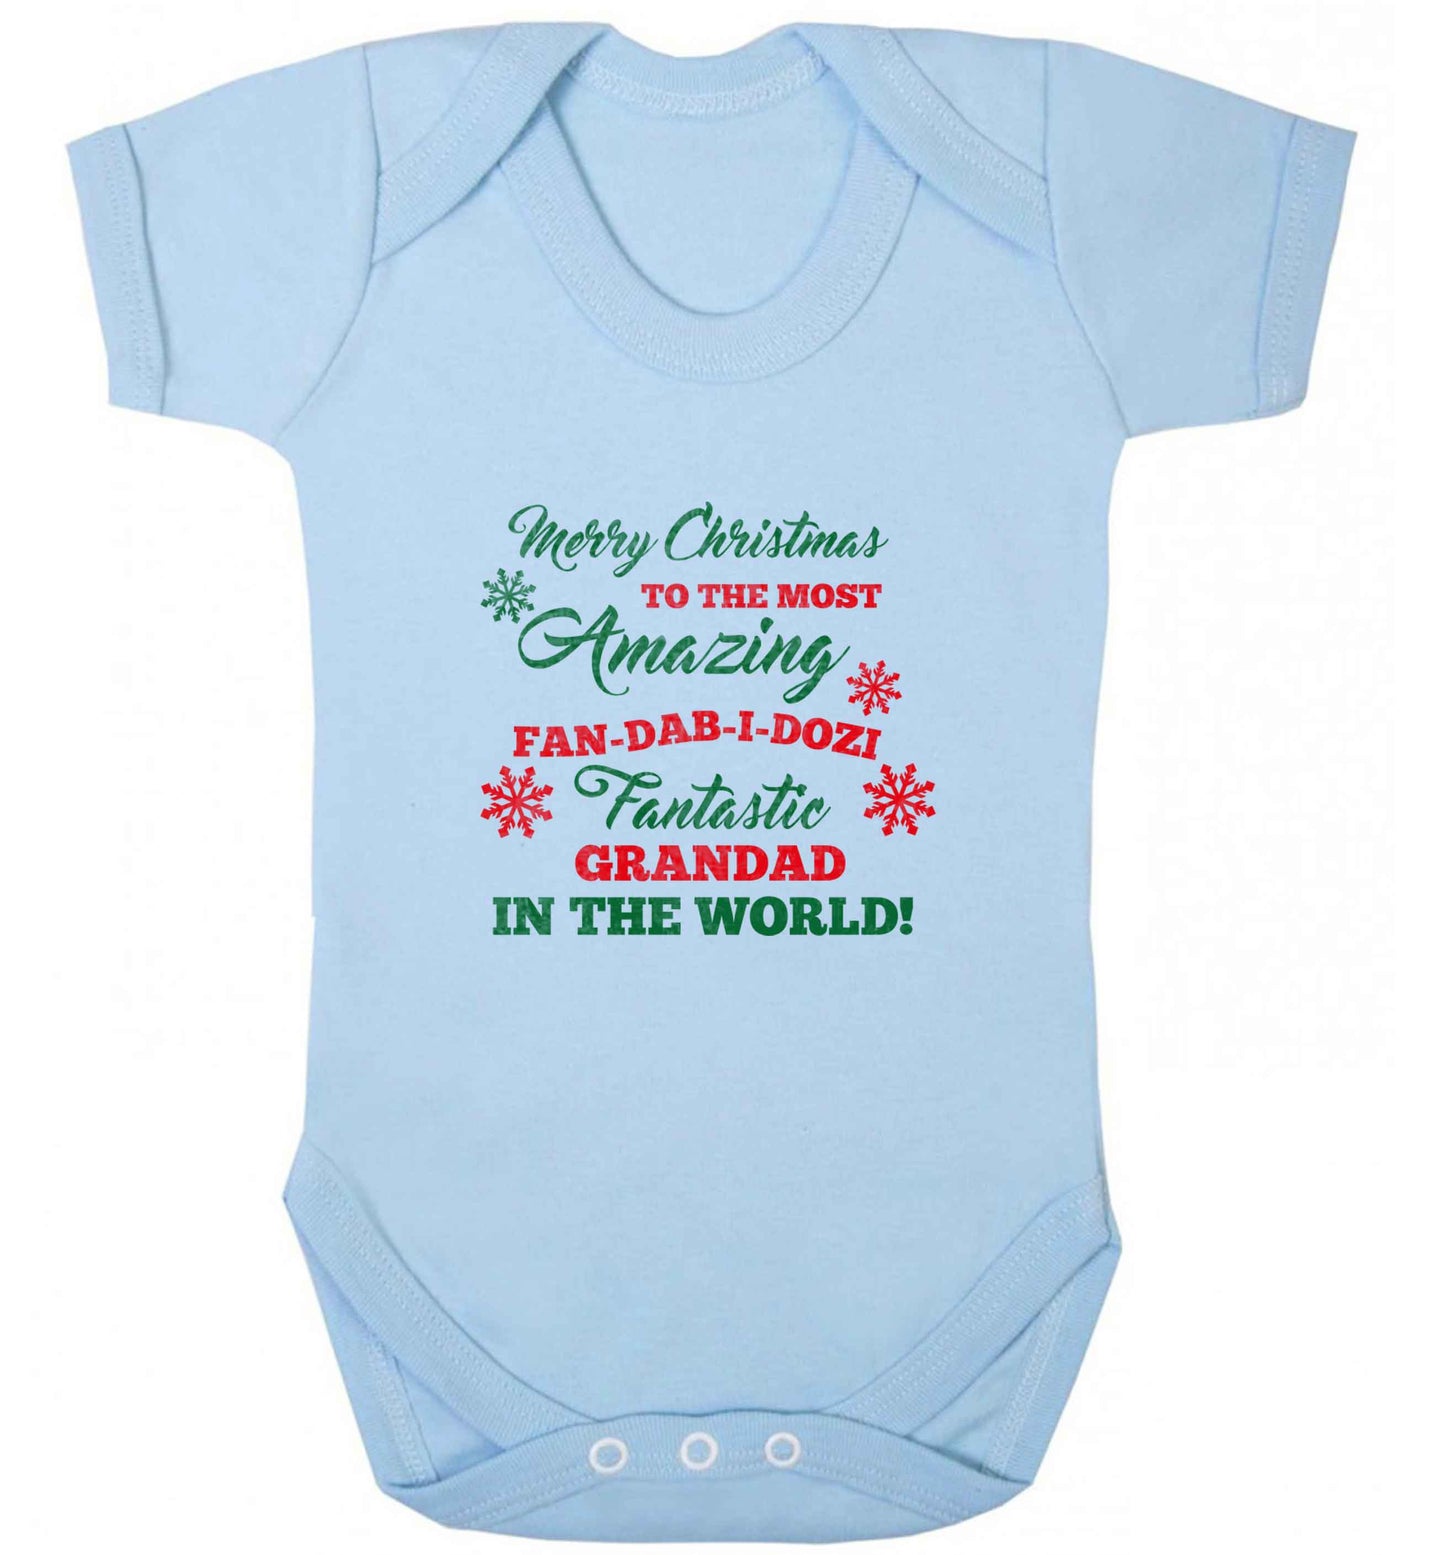 Merry Christmas to the most amazing fan-dab-i-dozi fantasic Grandad in the world baby vest pale blue 18-24 months